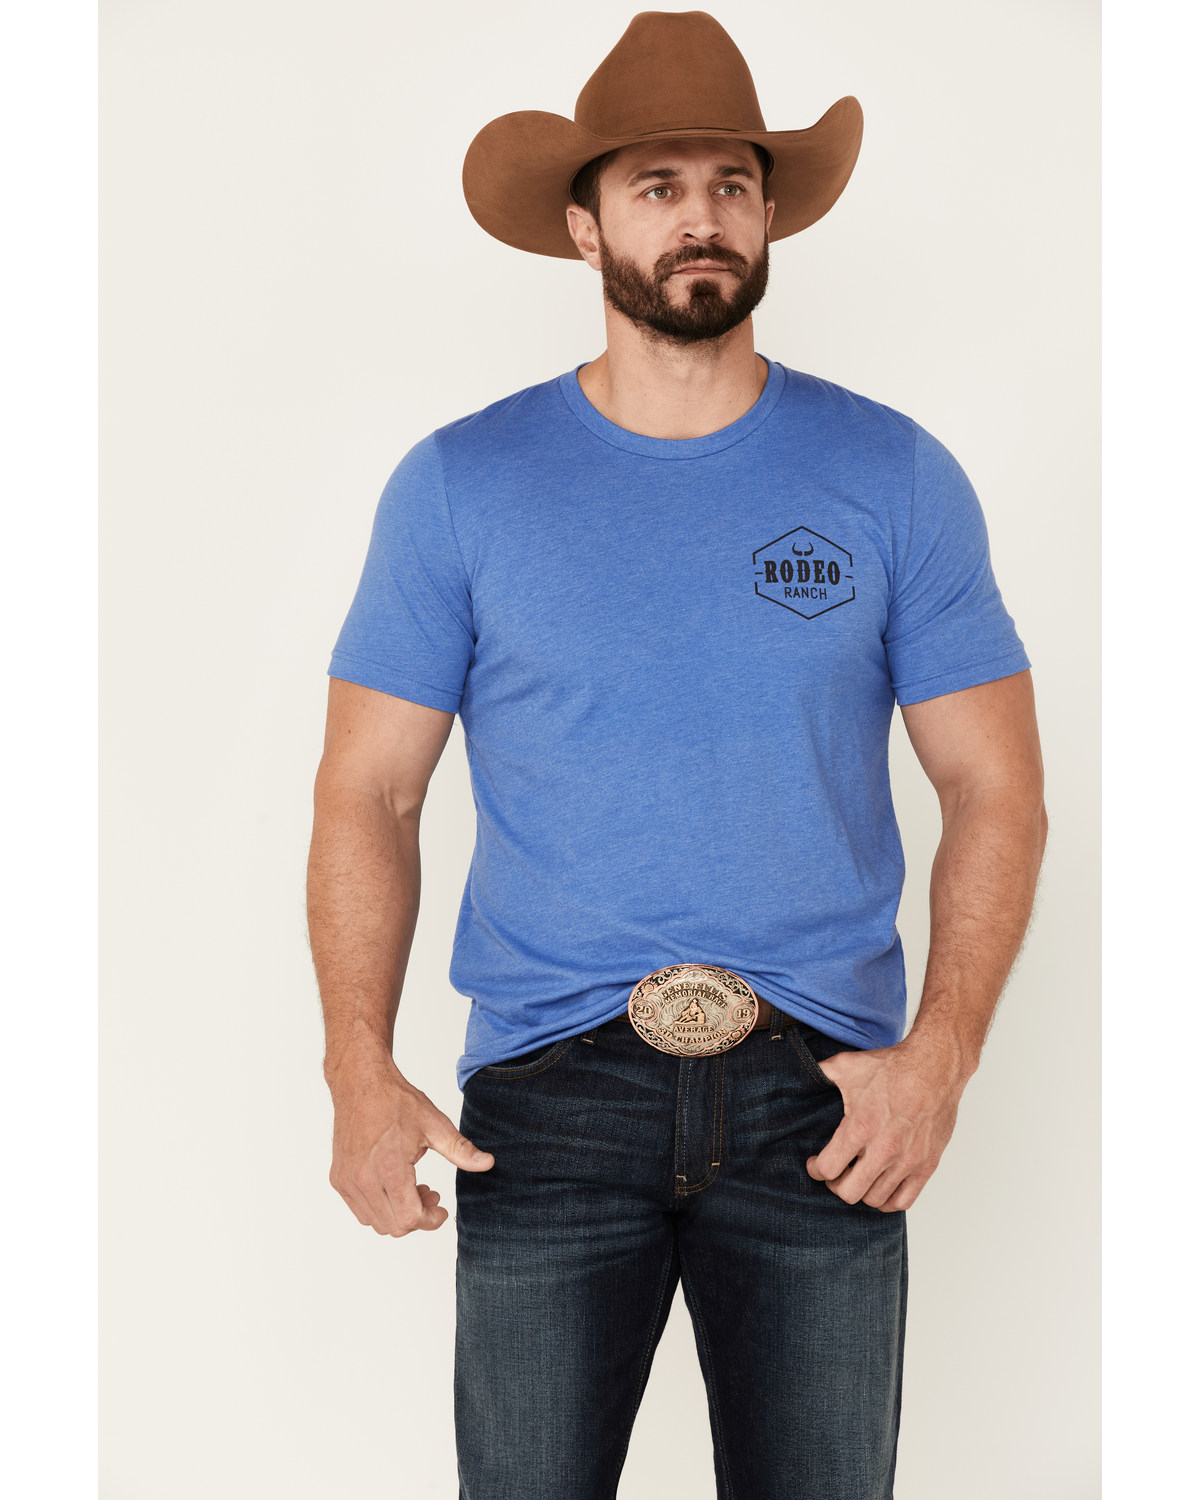 Rodeo Ranch Men's Spur Flag Graphic Short Sleeve T-Shirt